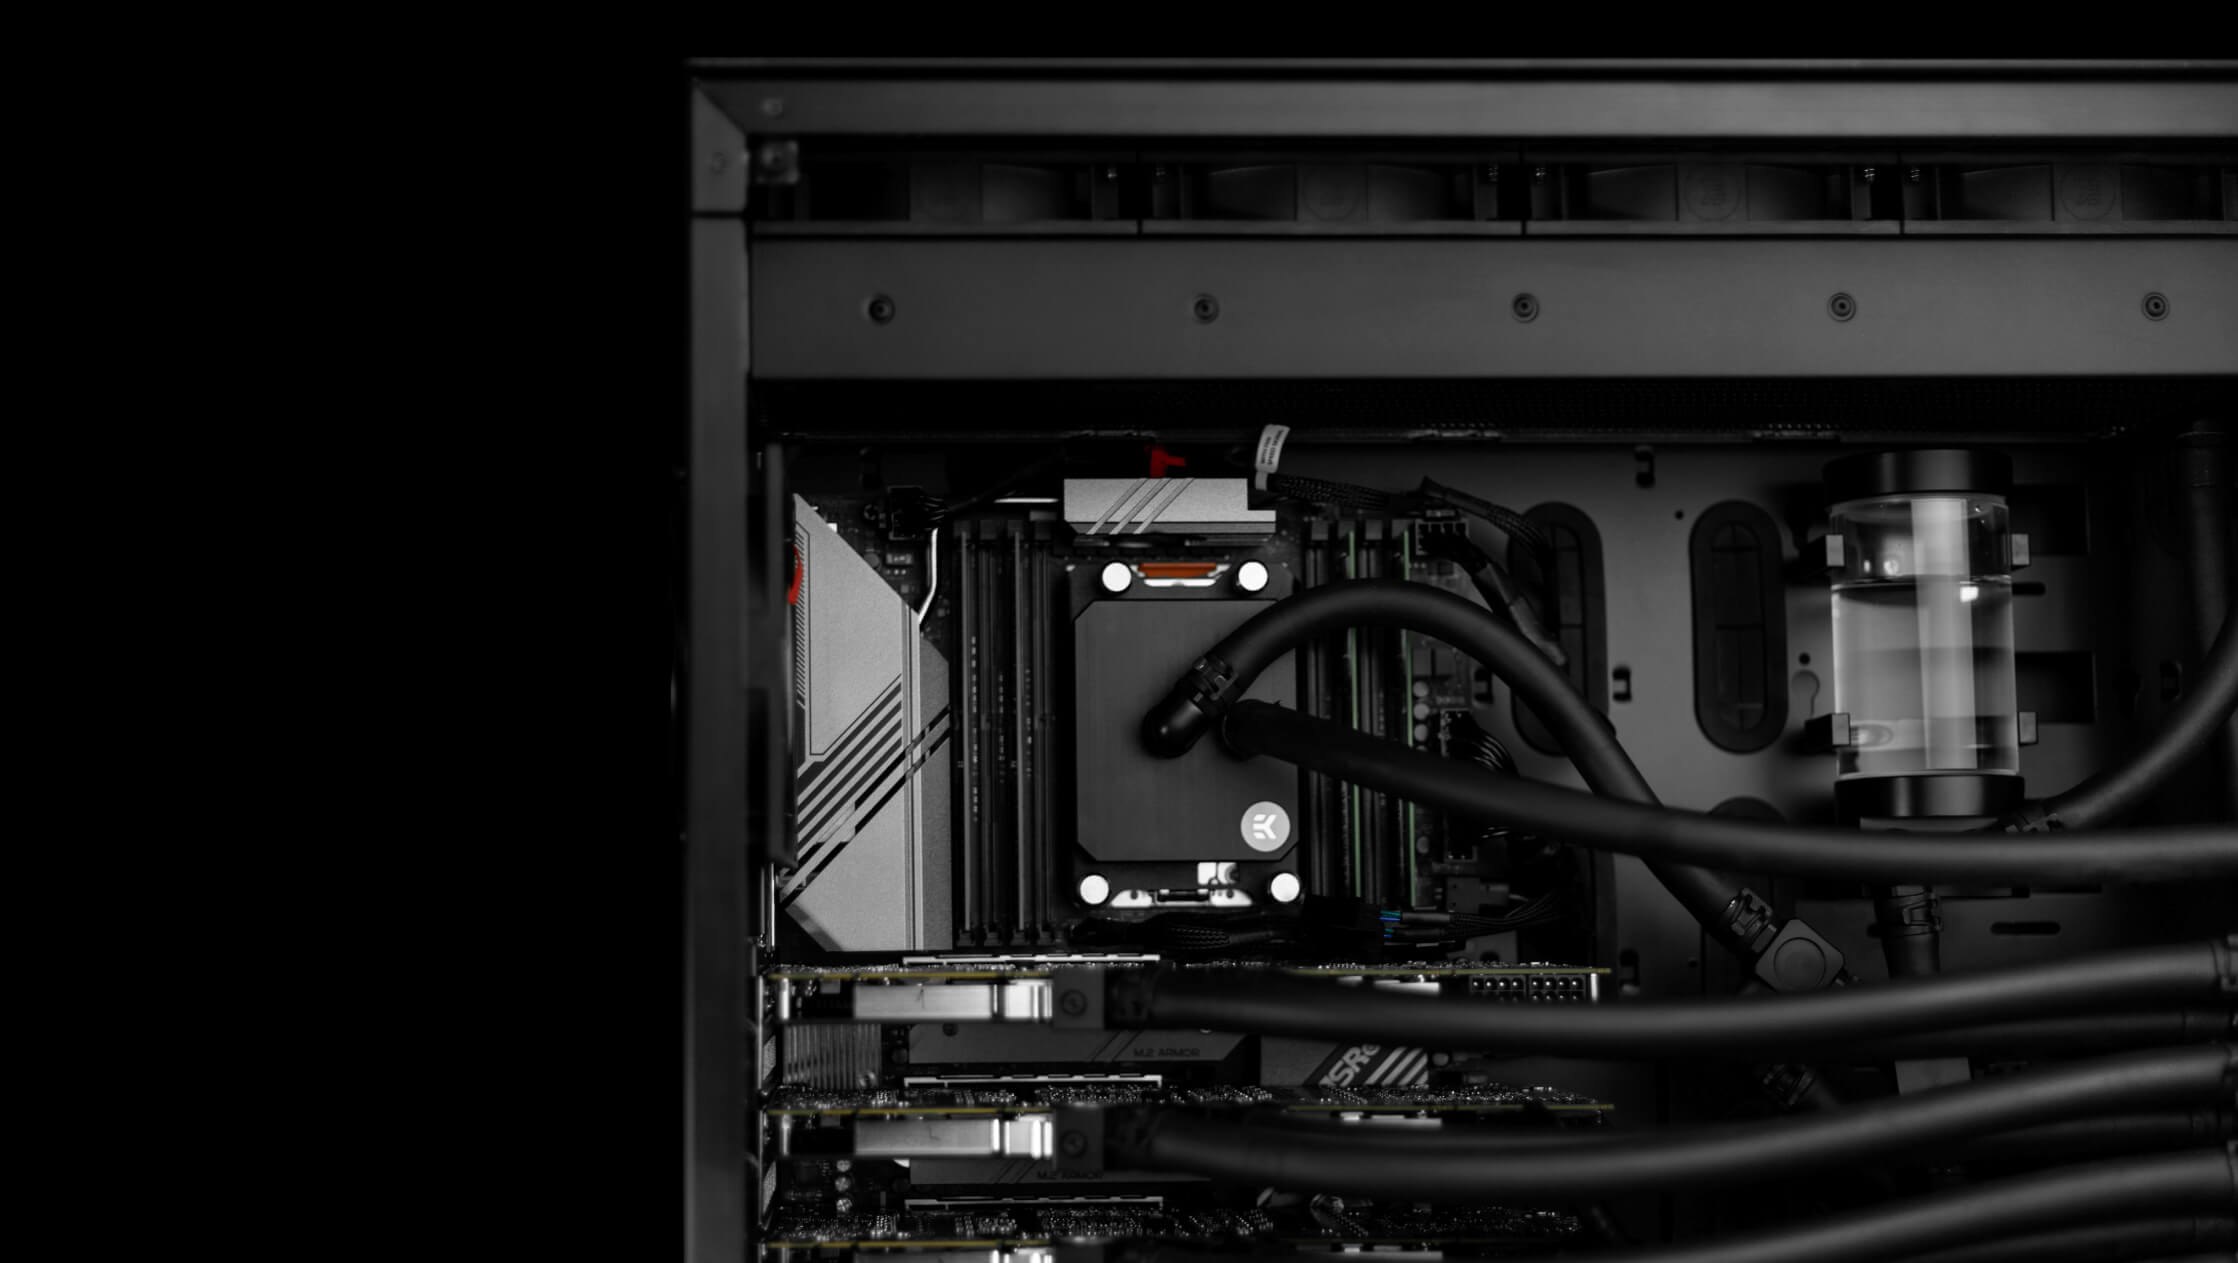 EK-Fluid Works Studio Series S5000 workstation with multiple GPUs – the ideal system for Octane Virtual production